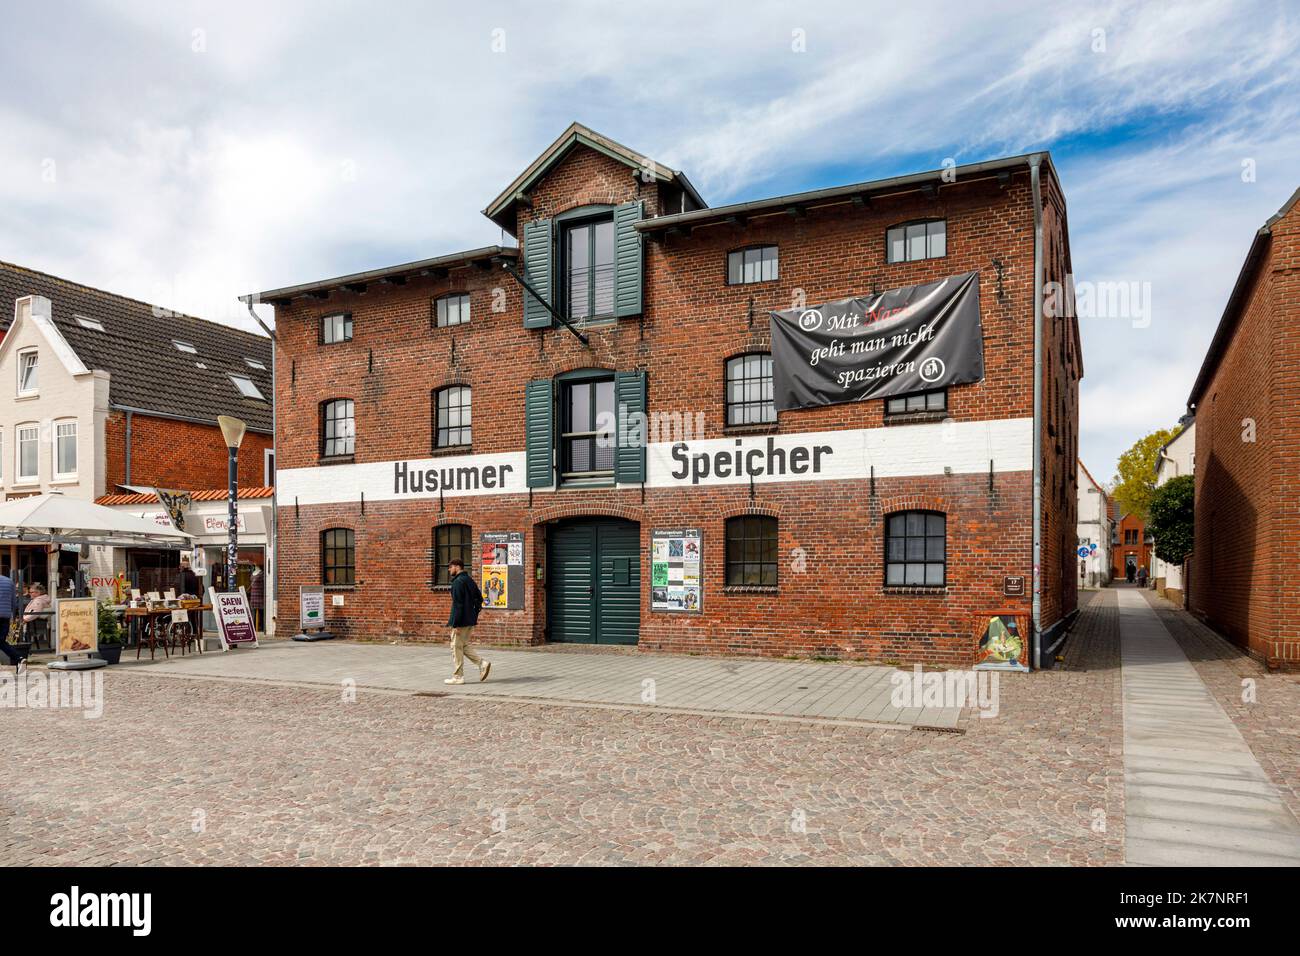 Husumer Speicher on Hafenstraße at the inland port of Husum, cultural center in a historic warehouse building Stock Photo